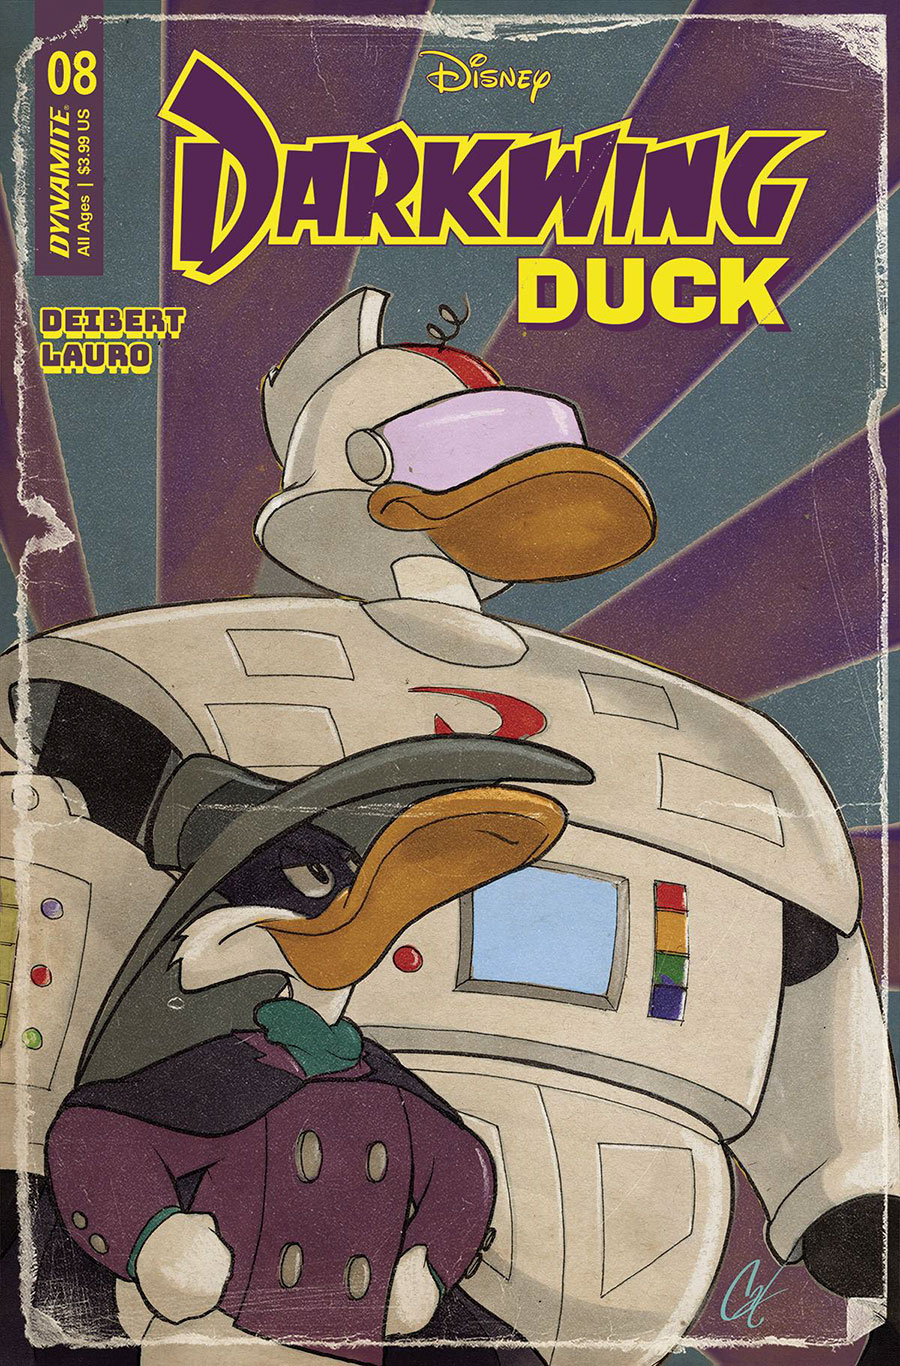 Darkwing Duck Vol 3 #8 Cover Q Variant Cat Staggs Cover